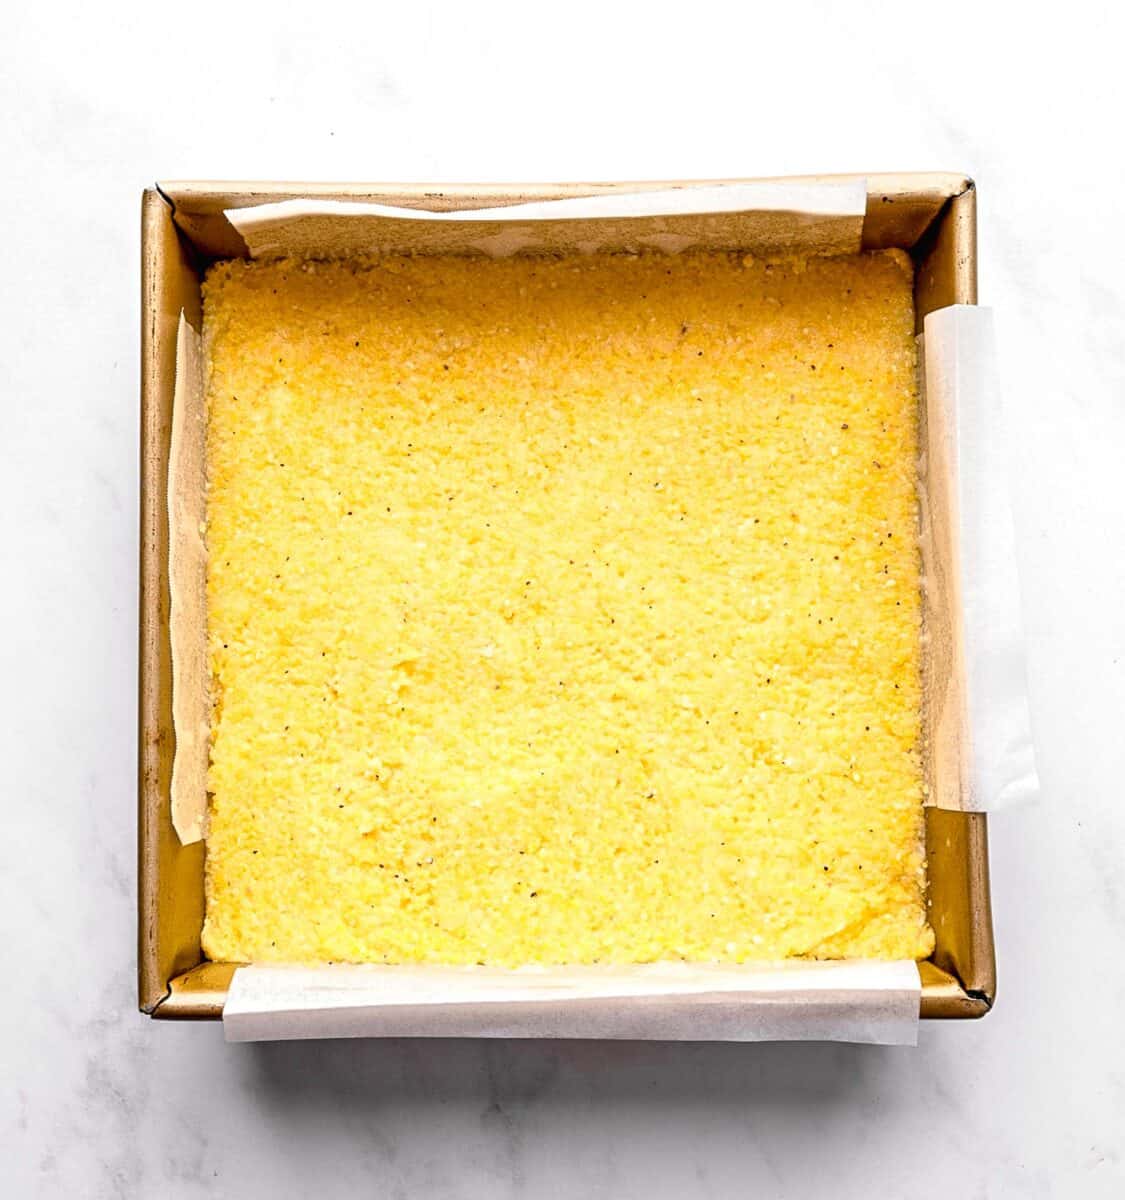 Chilled polenta in a baking pan.